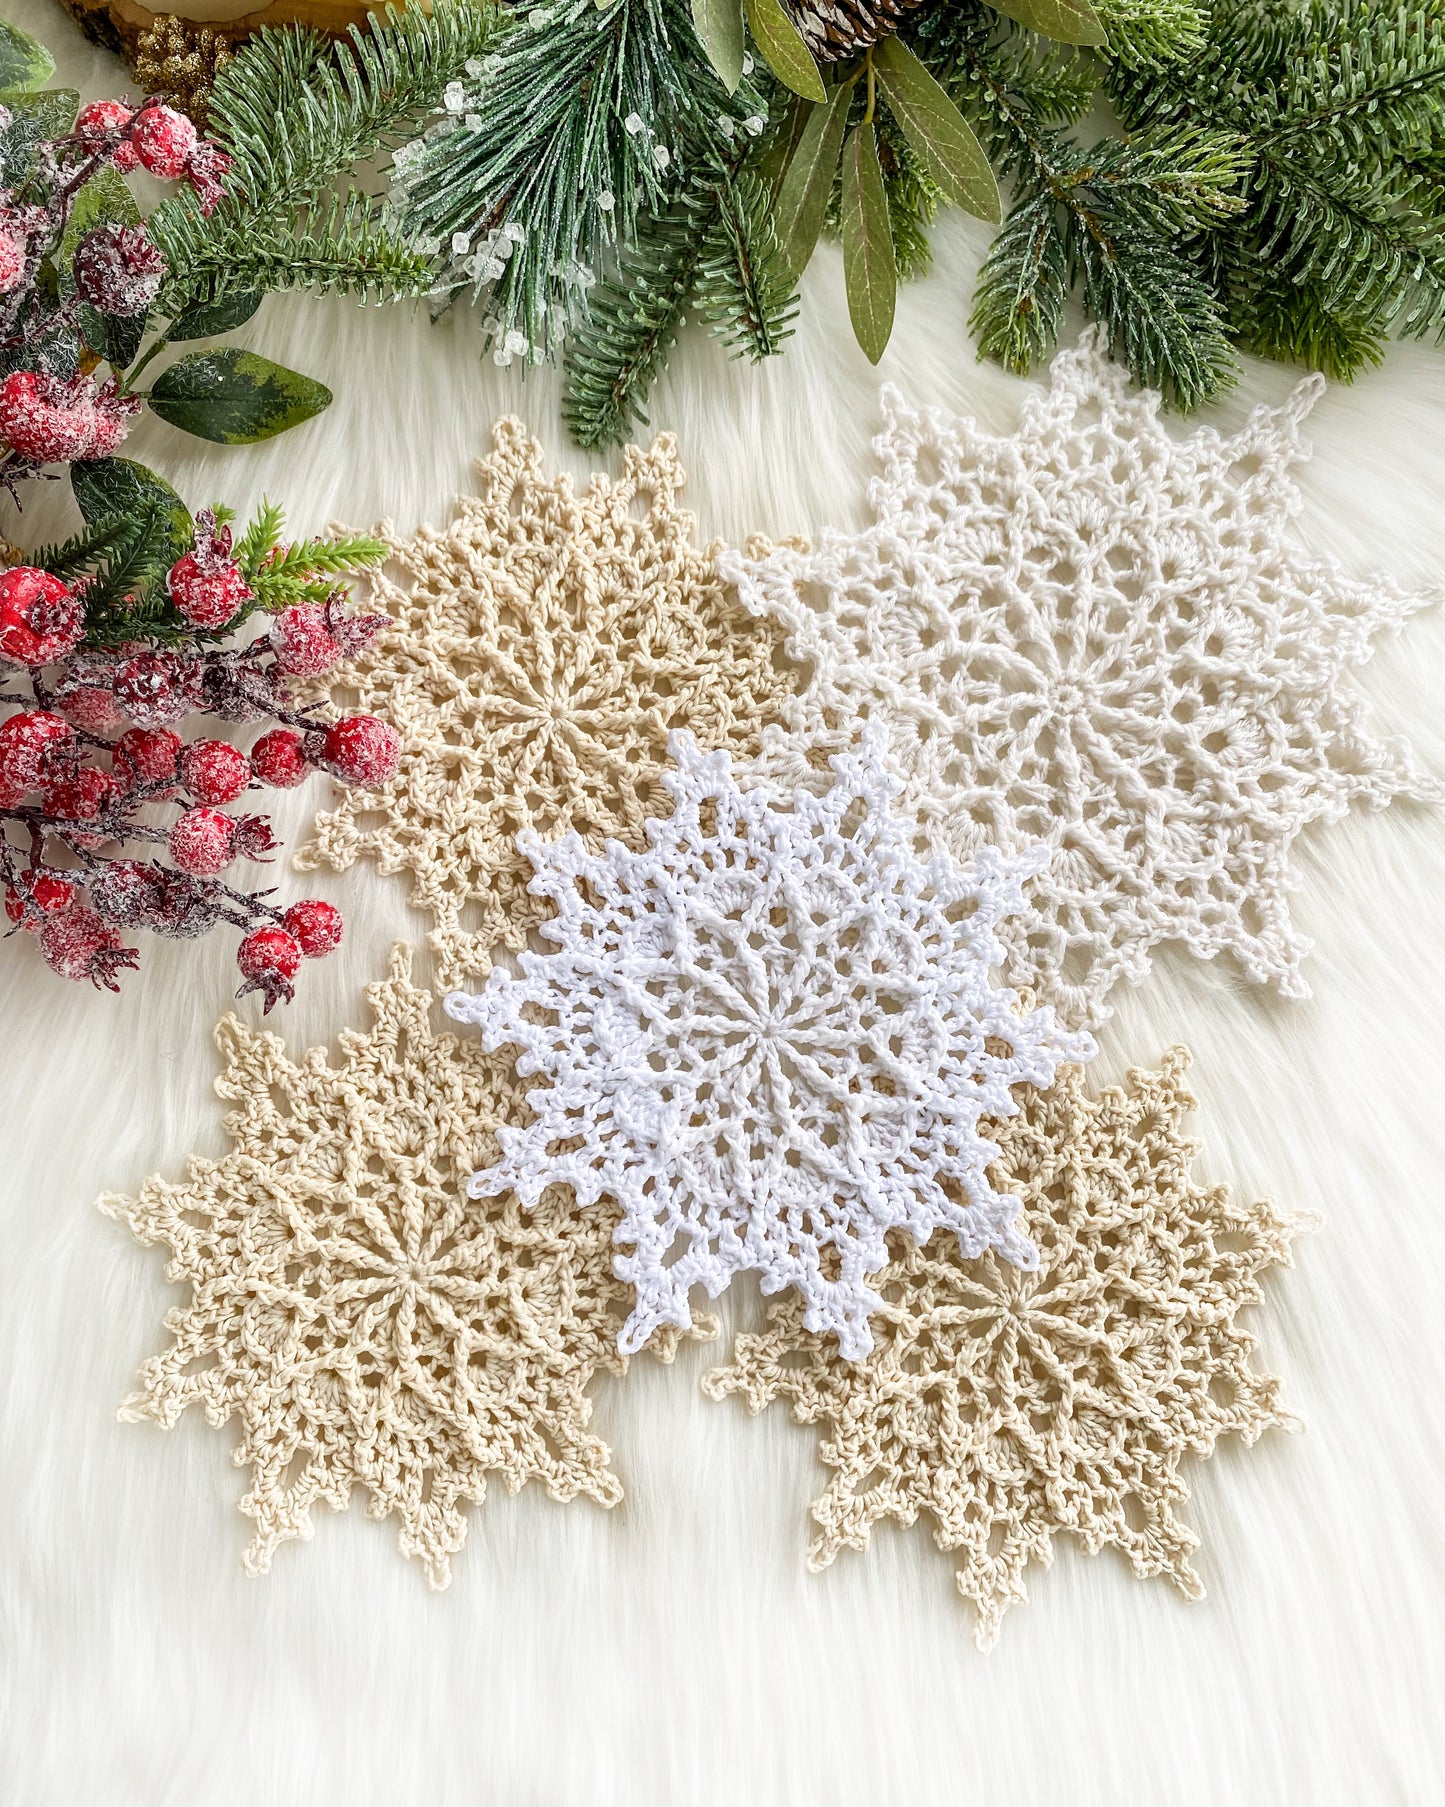 Crocheted Lace Snowflakes